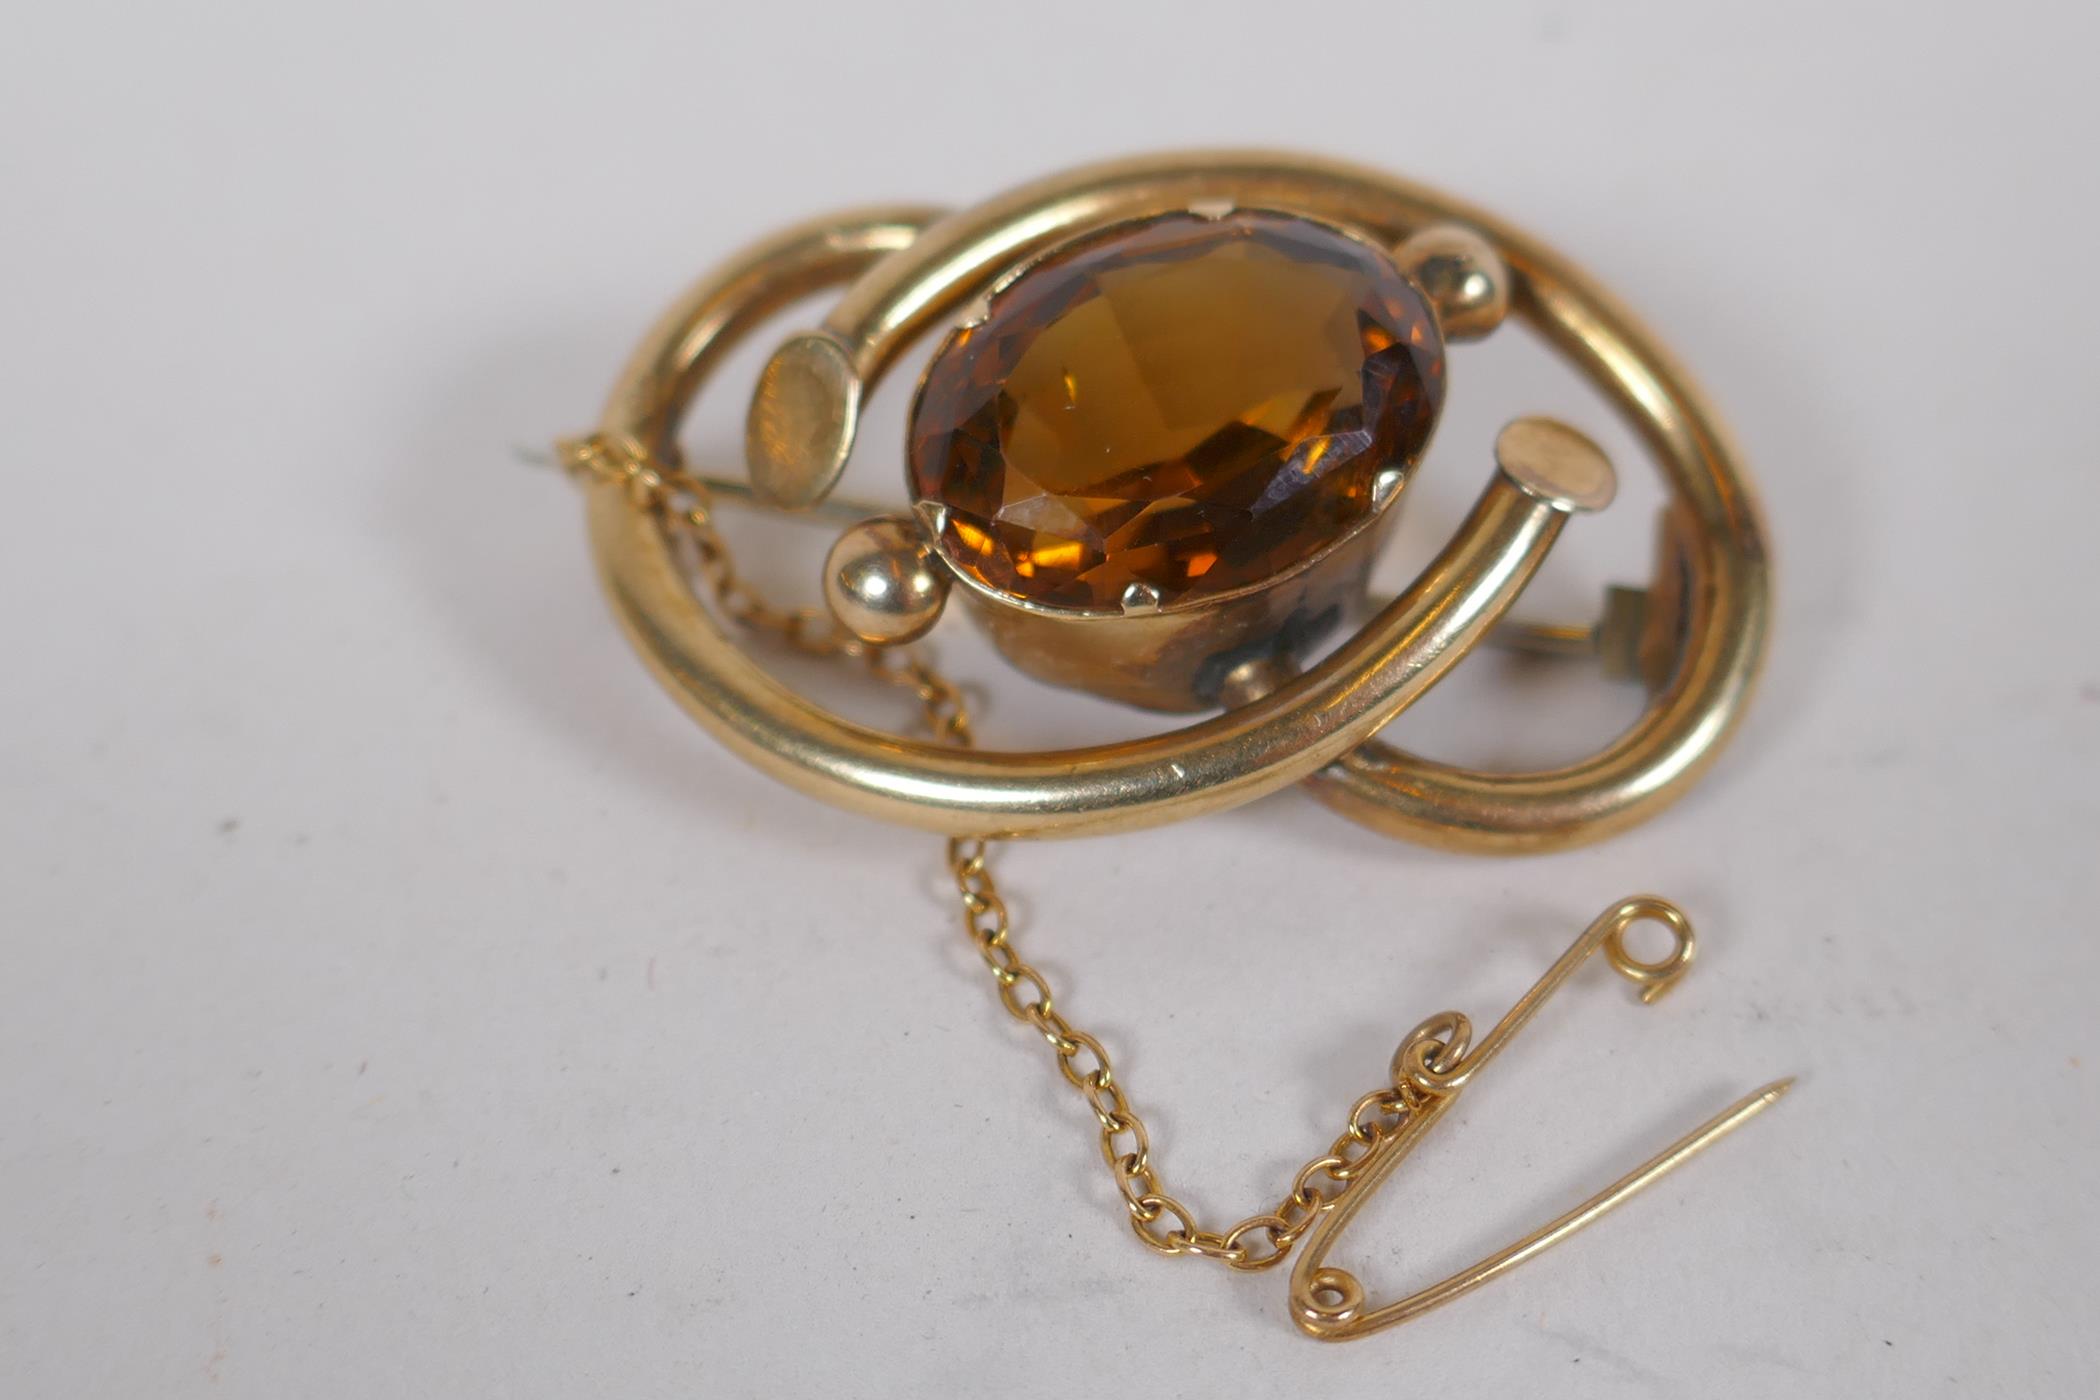 A yellow metal brooch set with a large amber coloured stone, citrine/amethyst, 11.6g